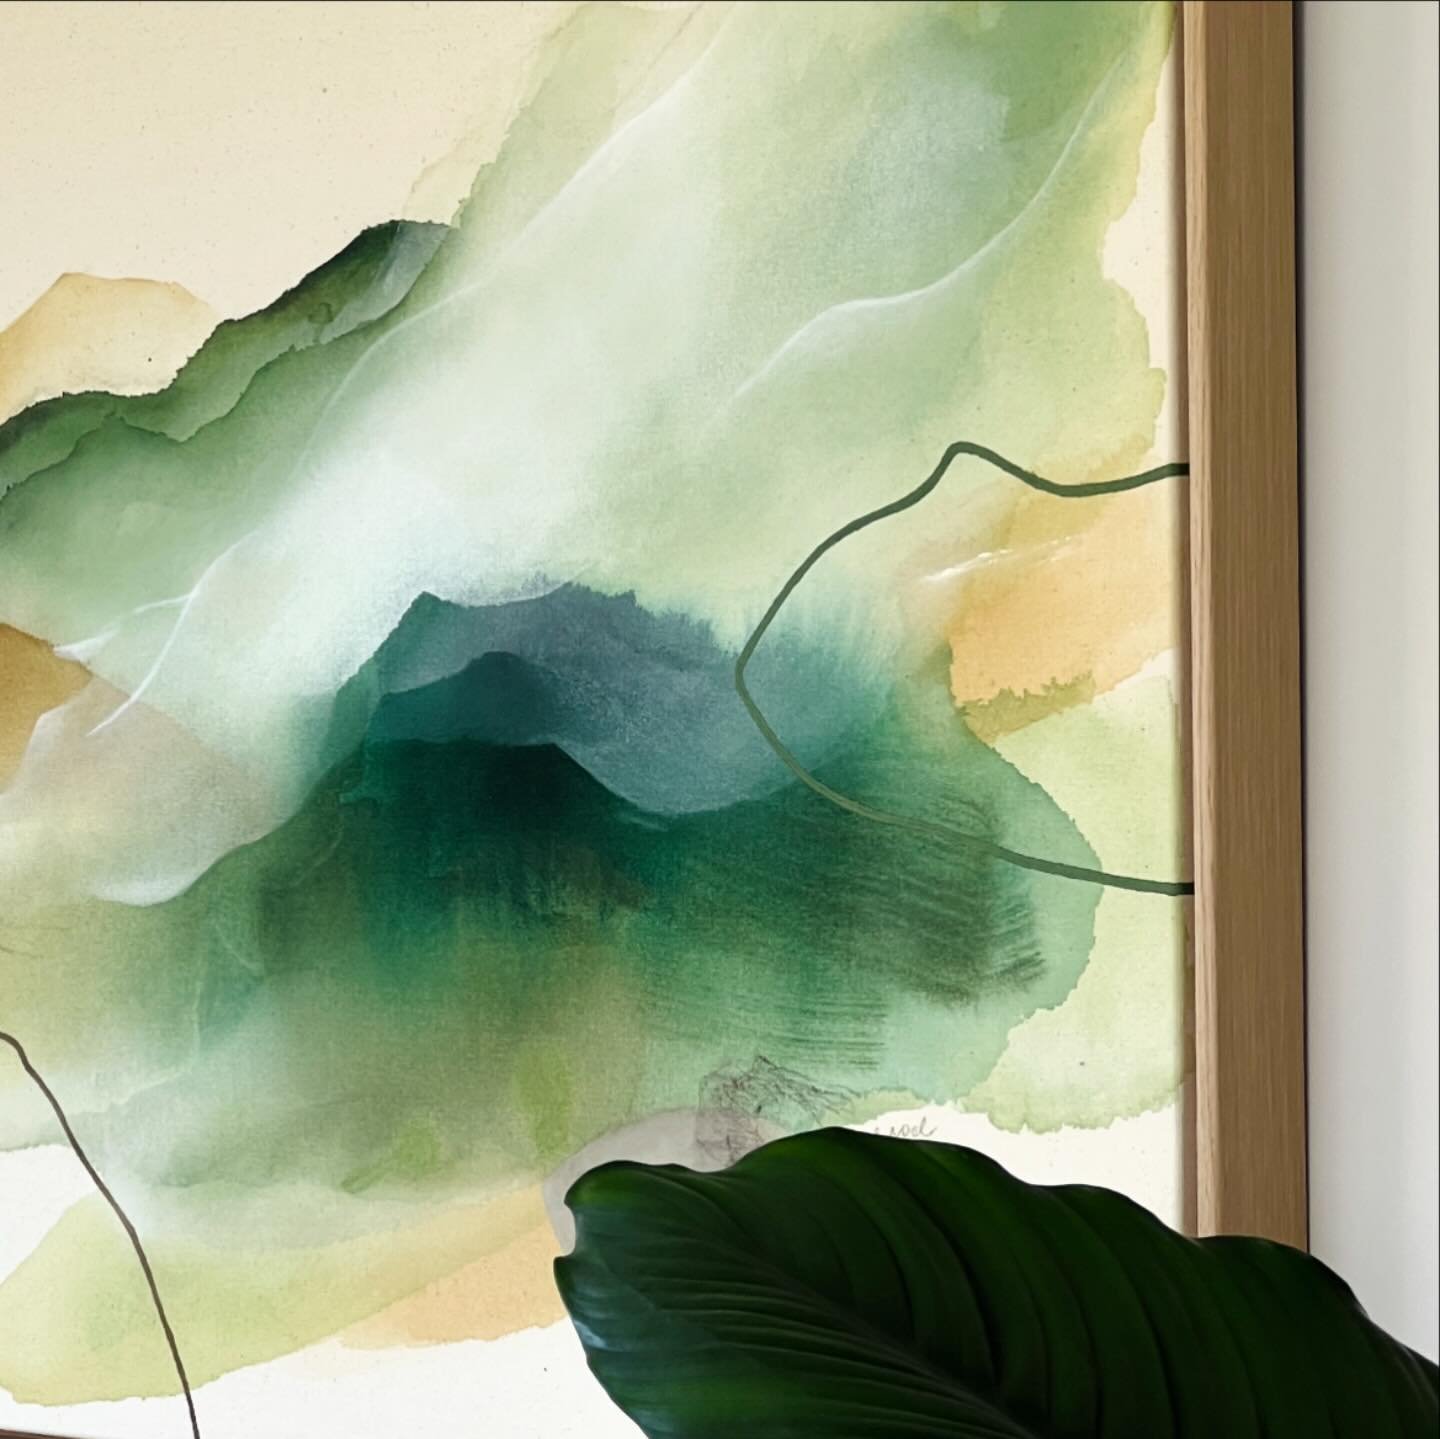 Sneak peek of ✨Journey into Expansion✨! Doesn&rsquo;t the deep greens and layers of rising vapor captivate you? A unique aspect of this piece is its depiction of the rare radium rock found in only two places in the world: Tamagawa hot spring in Akita